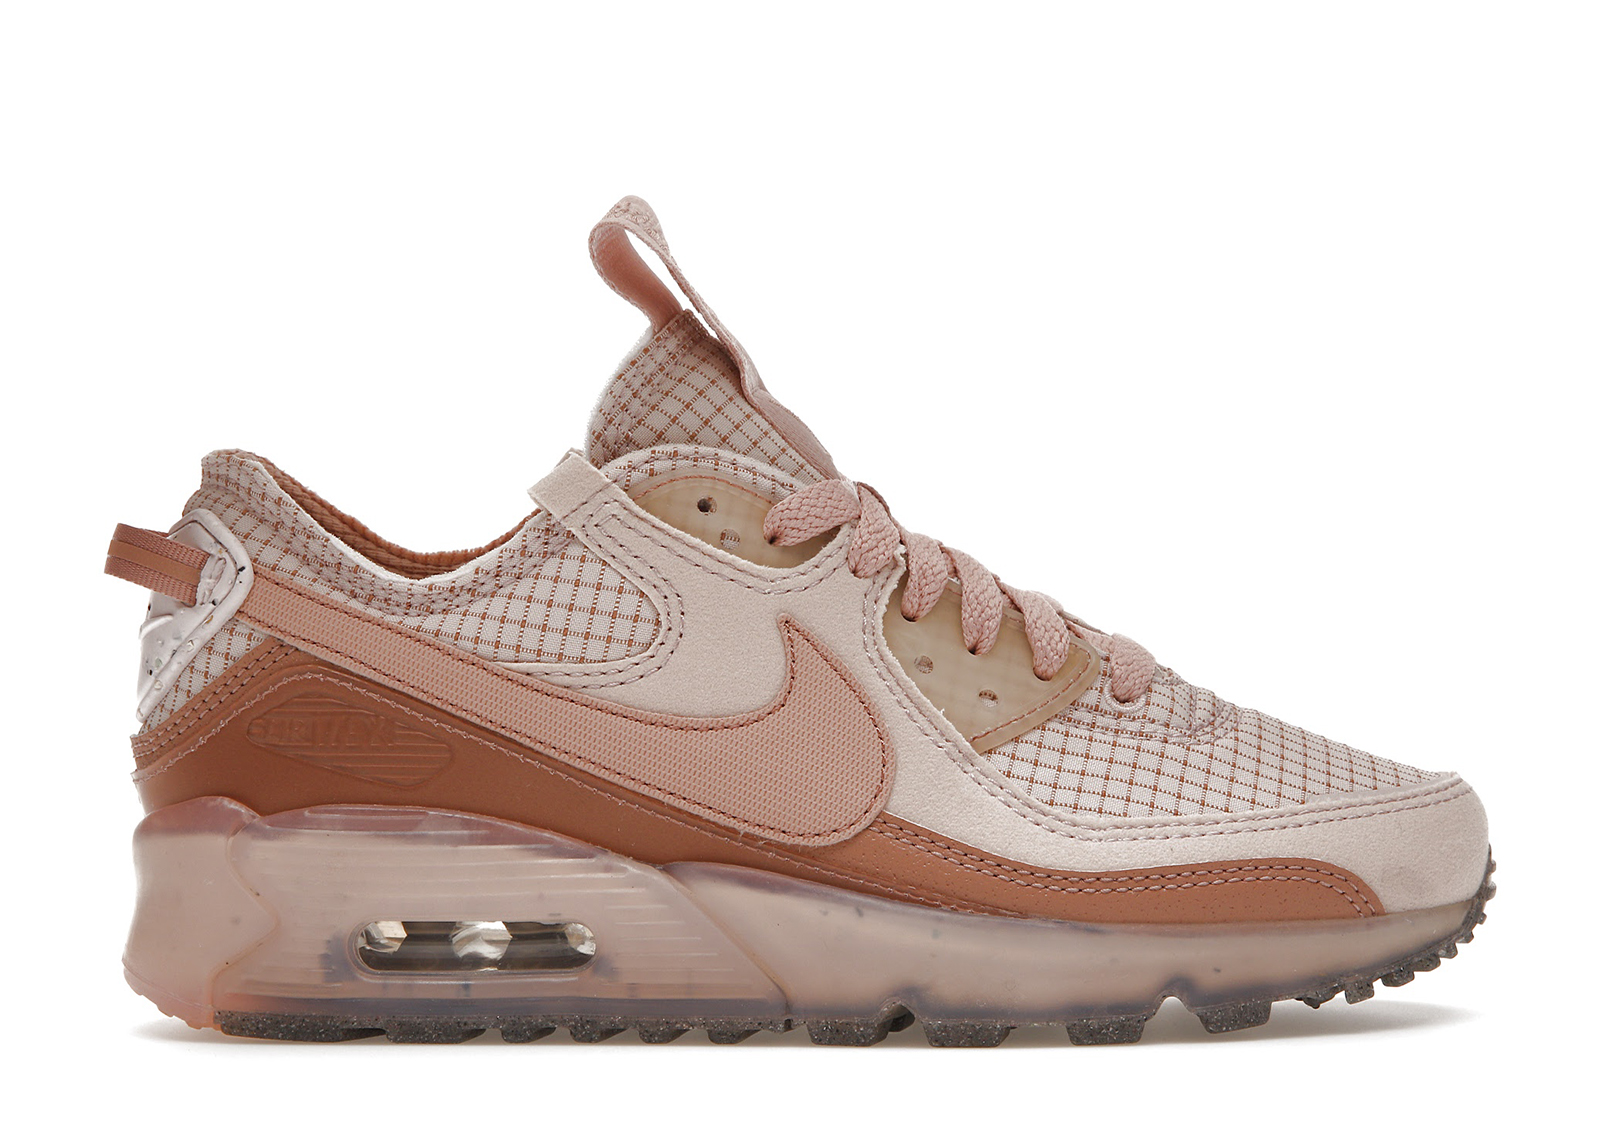 Nike Air Max 90 Terrascape Pink Oxford (Women's)